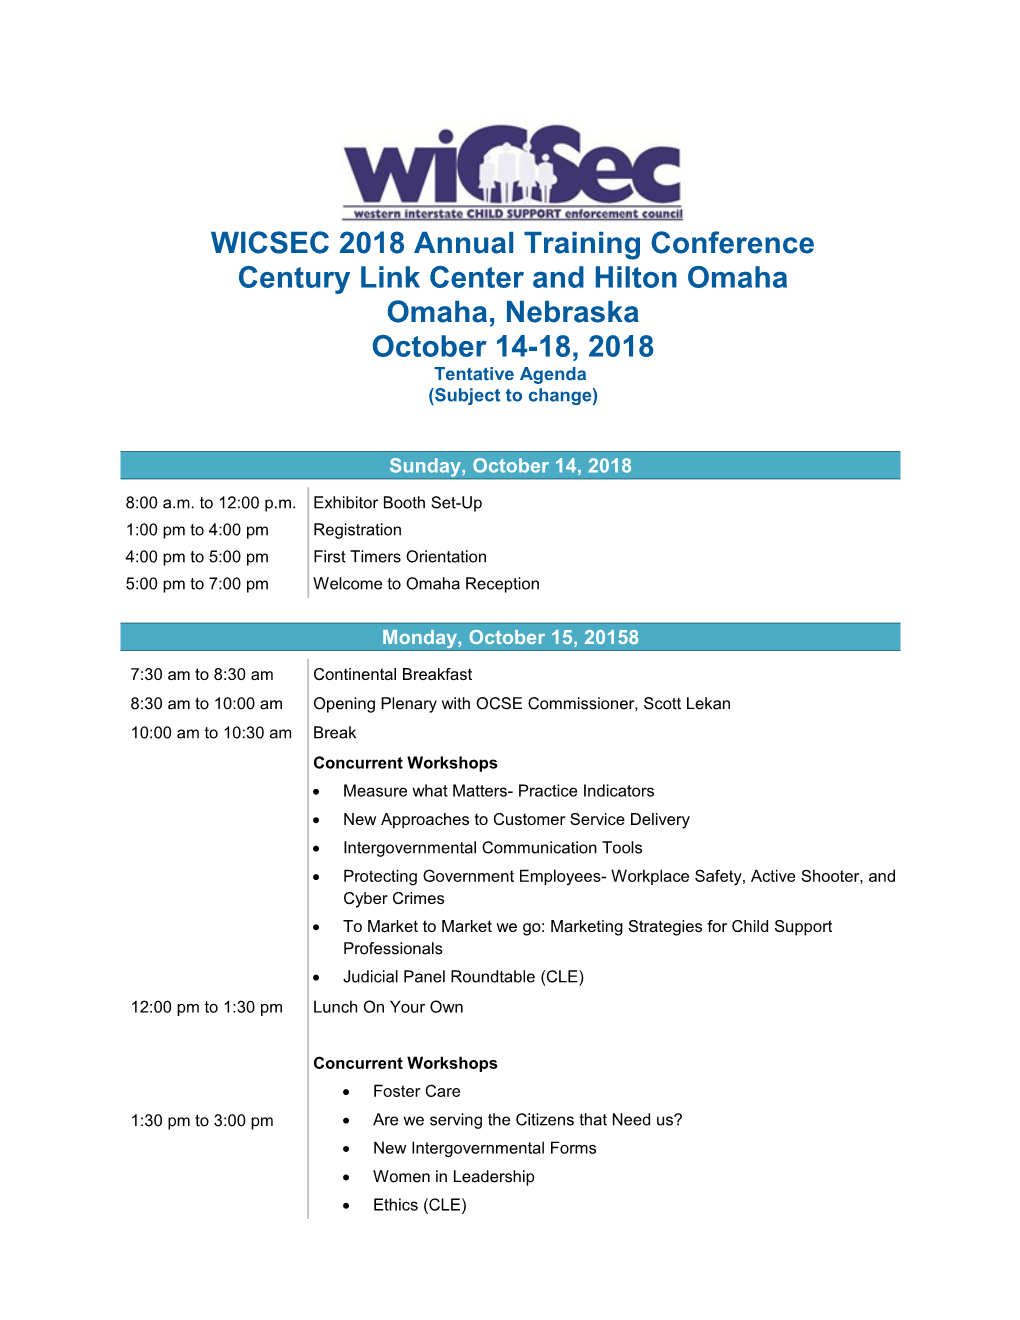 WICSEC 2018 Annual Training Conference